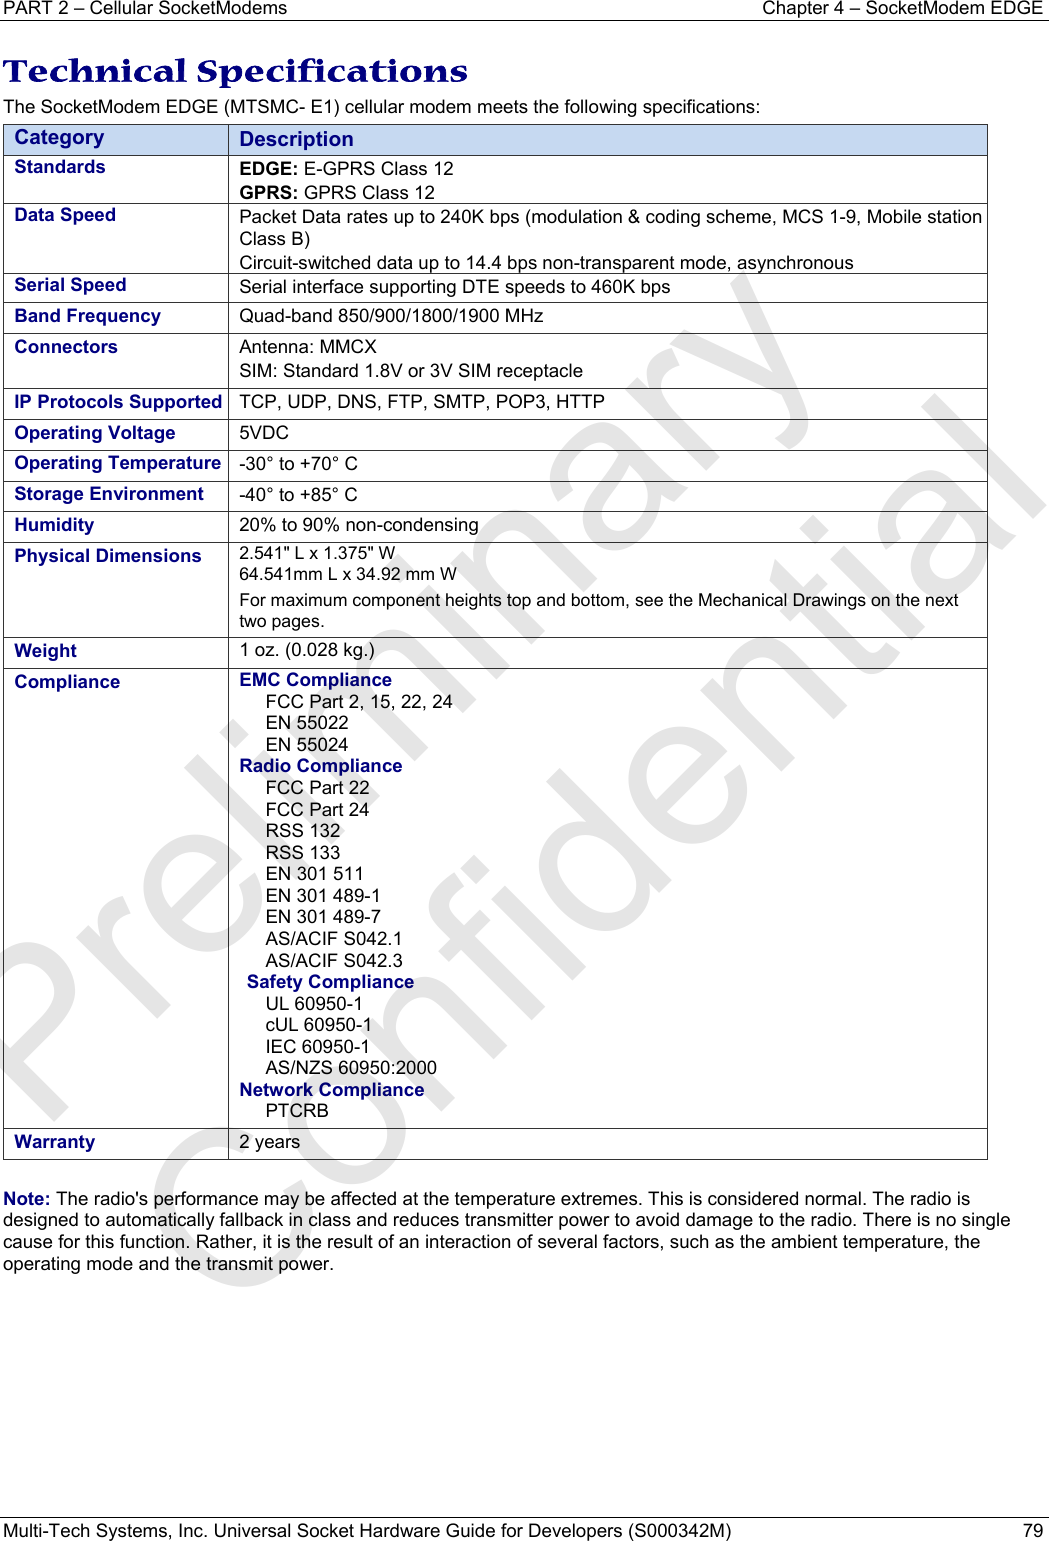 PART 2 – Cellular SocketModems  Chapter 4 – SocketModem EDGE Multi-Tech Systems, Inc. Universal Socket Hardware Guide for Developers (S000342M)  79  Technical Specifications The SocketModem EDGE (MTSMC- E1) cellular modem meets the following specifications:  Category  Description  Standards  EDGE: E-GPRS Class 12 GPRS: GPRS Class 12 Data Speed  Packet Data rates up to 240K bps (modulation &amp; coding scheme, MCS 1-9, Mobile station Class B) Circuit-switched data up to 14.4 bps non-transparent mode, asynchronous Serial Speed  Serial interface supporting DTE speeds to 460K bps Band Frequency  Quad-band 850/900/1800/1900 MHz Connectors  Antenna: MMCX SIM: Standard 1.8V or 3V SIM receptacle IP Protocols Supported  TCP, UDP, DNS, FTP, SMTP, POP3, HTTP Operating Voltage  5VDC Operating Temperature  -30° to +70° C   Storage Environment  -40° to +85° C  Humidity  20% to 90% non-condensing  Physical Dimensions  2.541&quot; L x 1.375&quot; W 64.541mm L x 34.92 mm W For maximum component heights top and bottom, see the Mechanical Drawings on the next two pages. Weight  1 oz. (0.028 kg.)  Compliance  EMC Compliance  FCC Part 2, 15, 22, 24 EN 55022 EN 55024 Radio Compliance    FCC Part 22 FCC Part 24 RSS 132 RSS 133 EN 301 511 EN 301 489-1 EN 301 489-7 AS/ACIF S042.1 AS/ACIF S042.3 Safety Compliance UL 60950-1 cUL 60950-1 IEC 60950-1 AS/NZS 60950:2000 Network Compliance  PTCRB Warranty  2 years  Note: The radio&apos;s performance may be affected at the temperature extremes. This is considered normal. The radio is designed to automatically fallback in class and reduces transmitter power to avoid damage to the radio. There is no single cause for this function. Rather, it is the result of an interaction of several factors, such as the ambient temperature, the operating mode and the transmit power.  Preliminary  Confidential